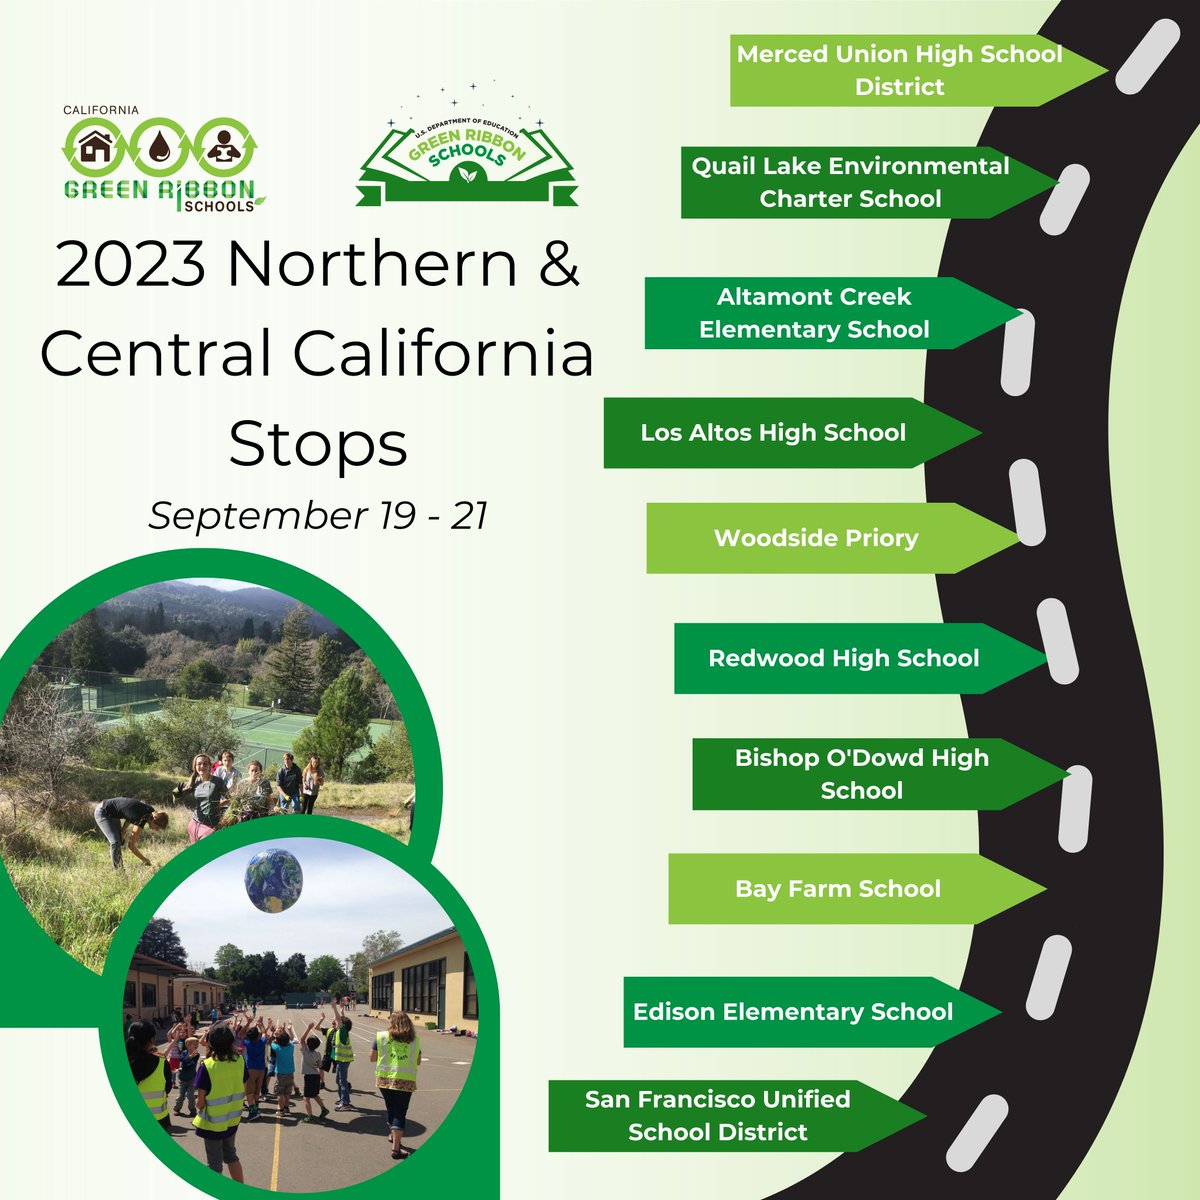 Today, we're kicking off the 2023 ED #GreenStrides Tour! Follow along from September 19-21 as @EDGreenRibbon visits 10 schools across Northern & Central California, celebrating recent ED Green Ribbon School winners. ed.gov/news/media-adv…